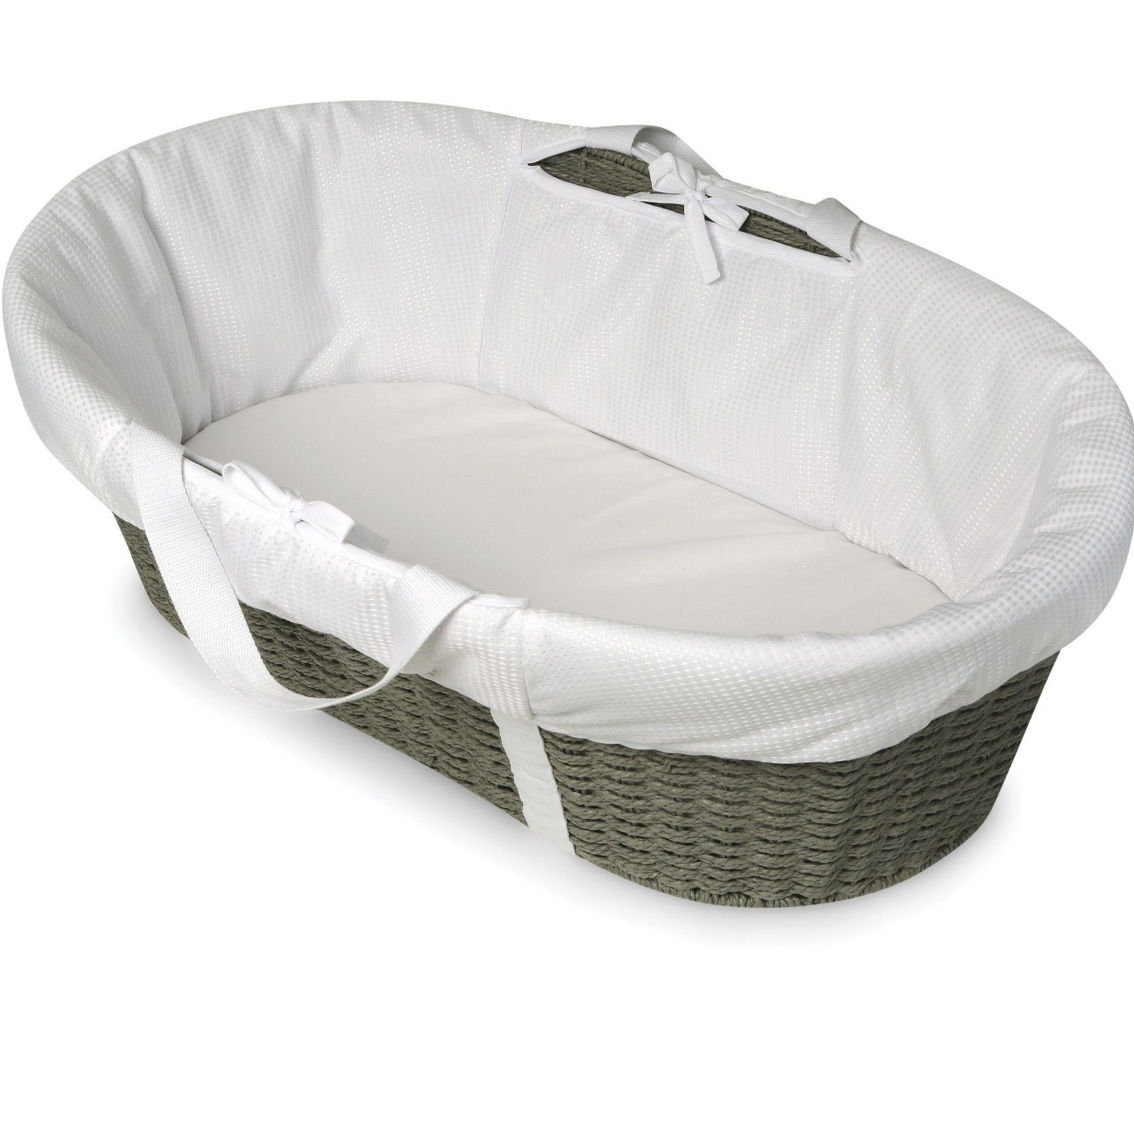 Badger Basket Wicker-Look Woven Baby Moses Changing Basket - Image 5 of 5